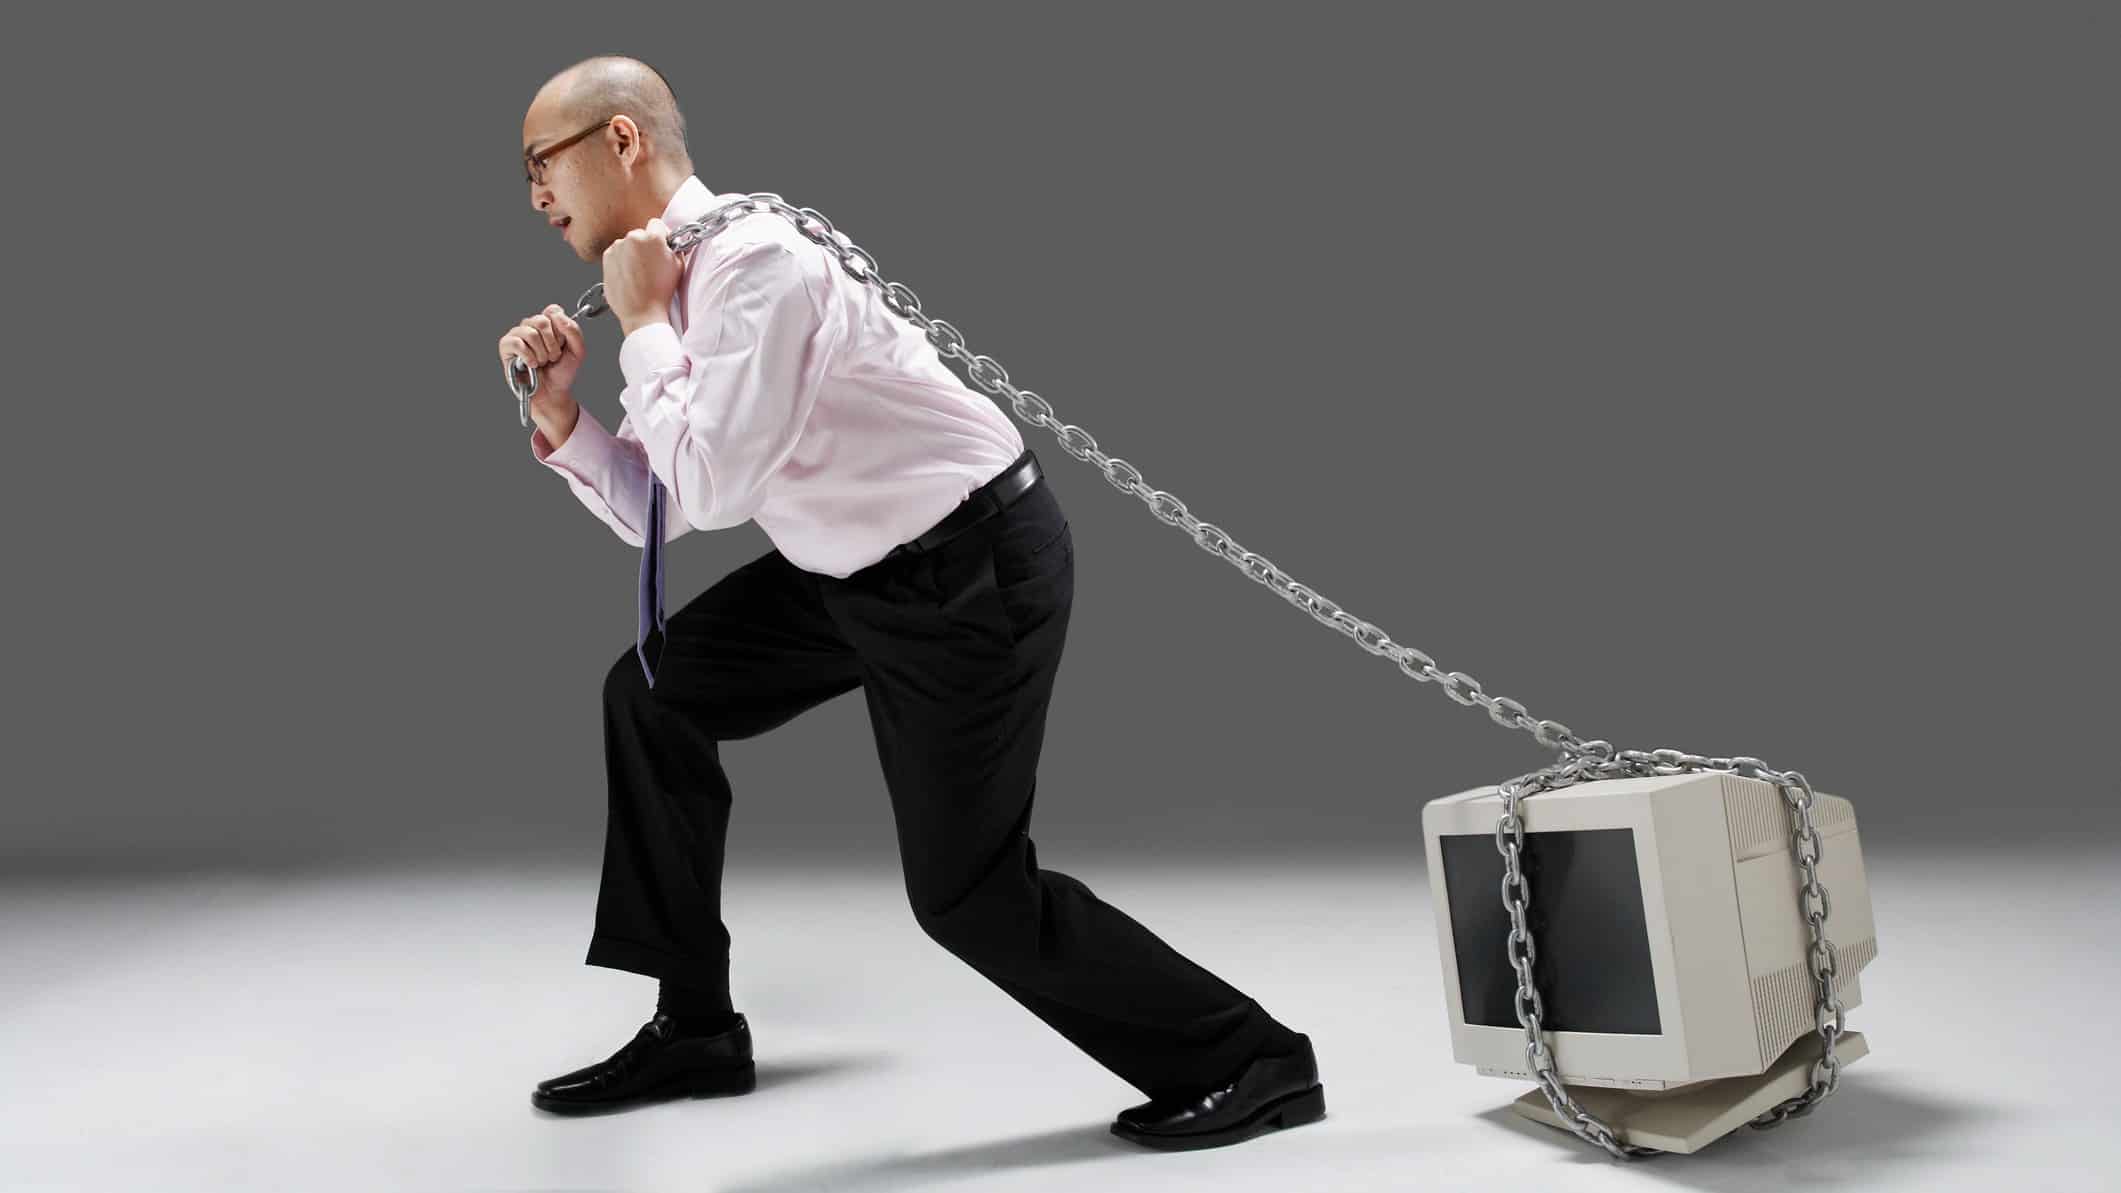 a man in a business shirt and trousers drags a chain wrapped around a computer as thought it is very heavy to move.